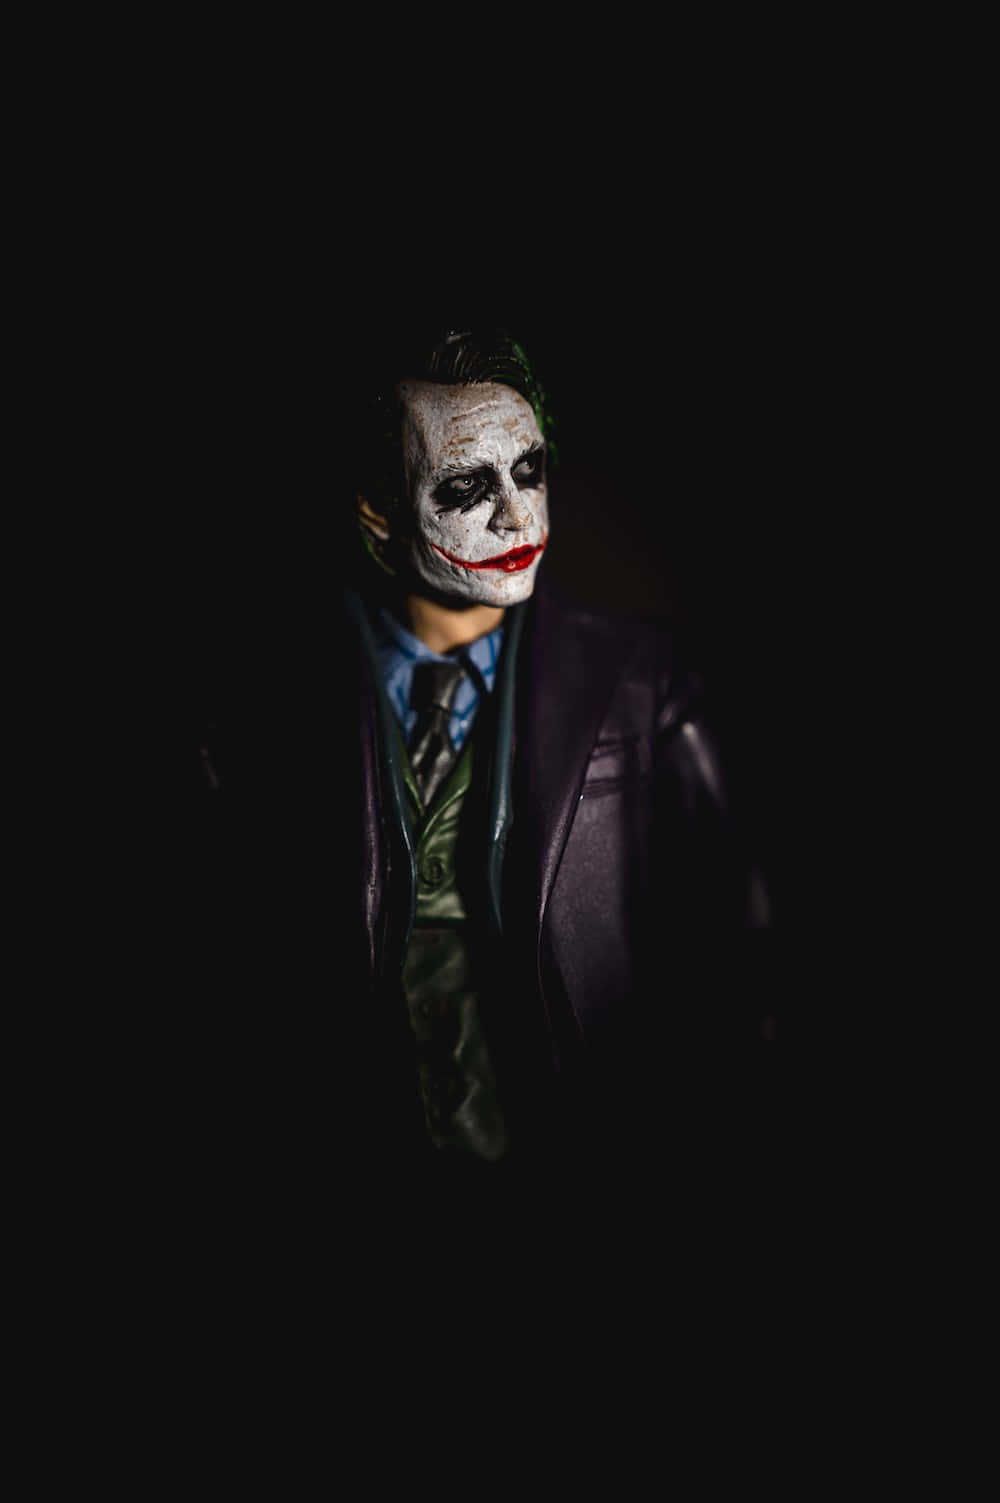 A brooding Dark Joker in a mysterious and captivating portrait Wallpaper